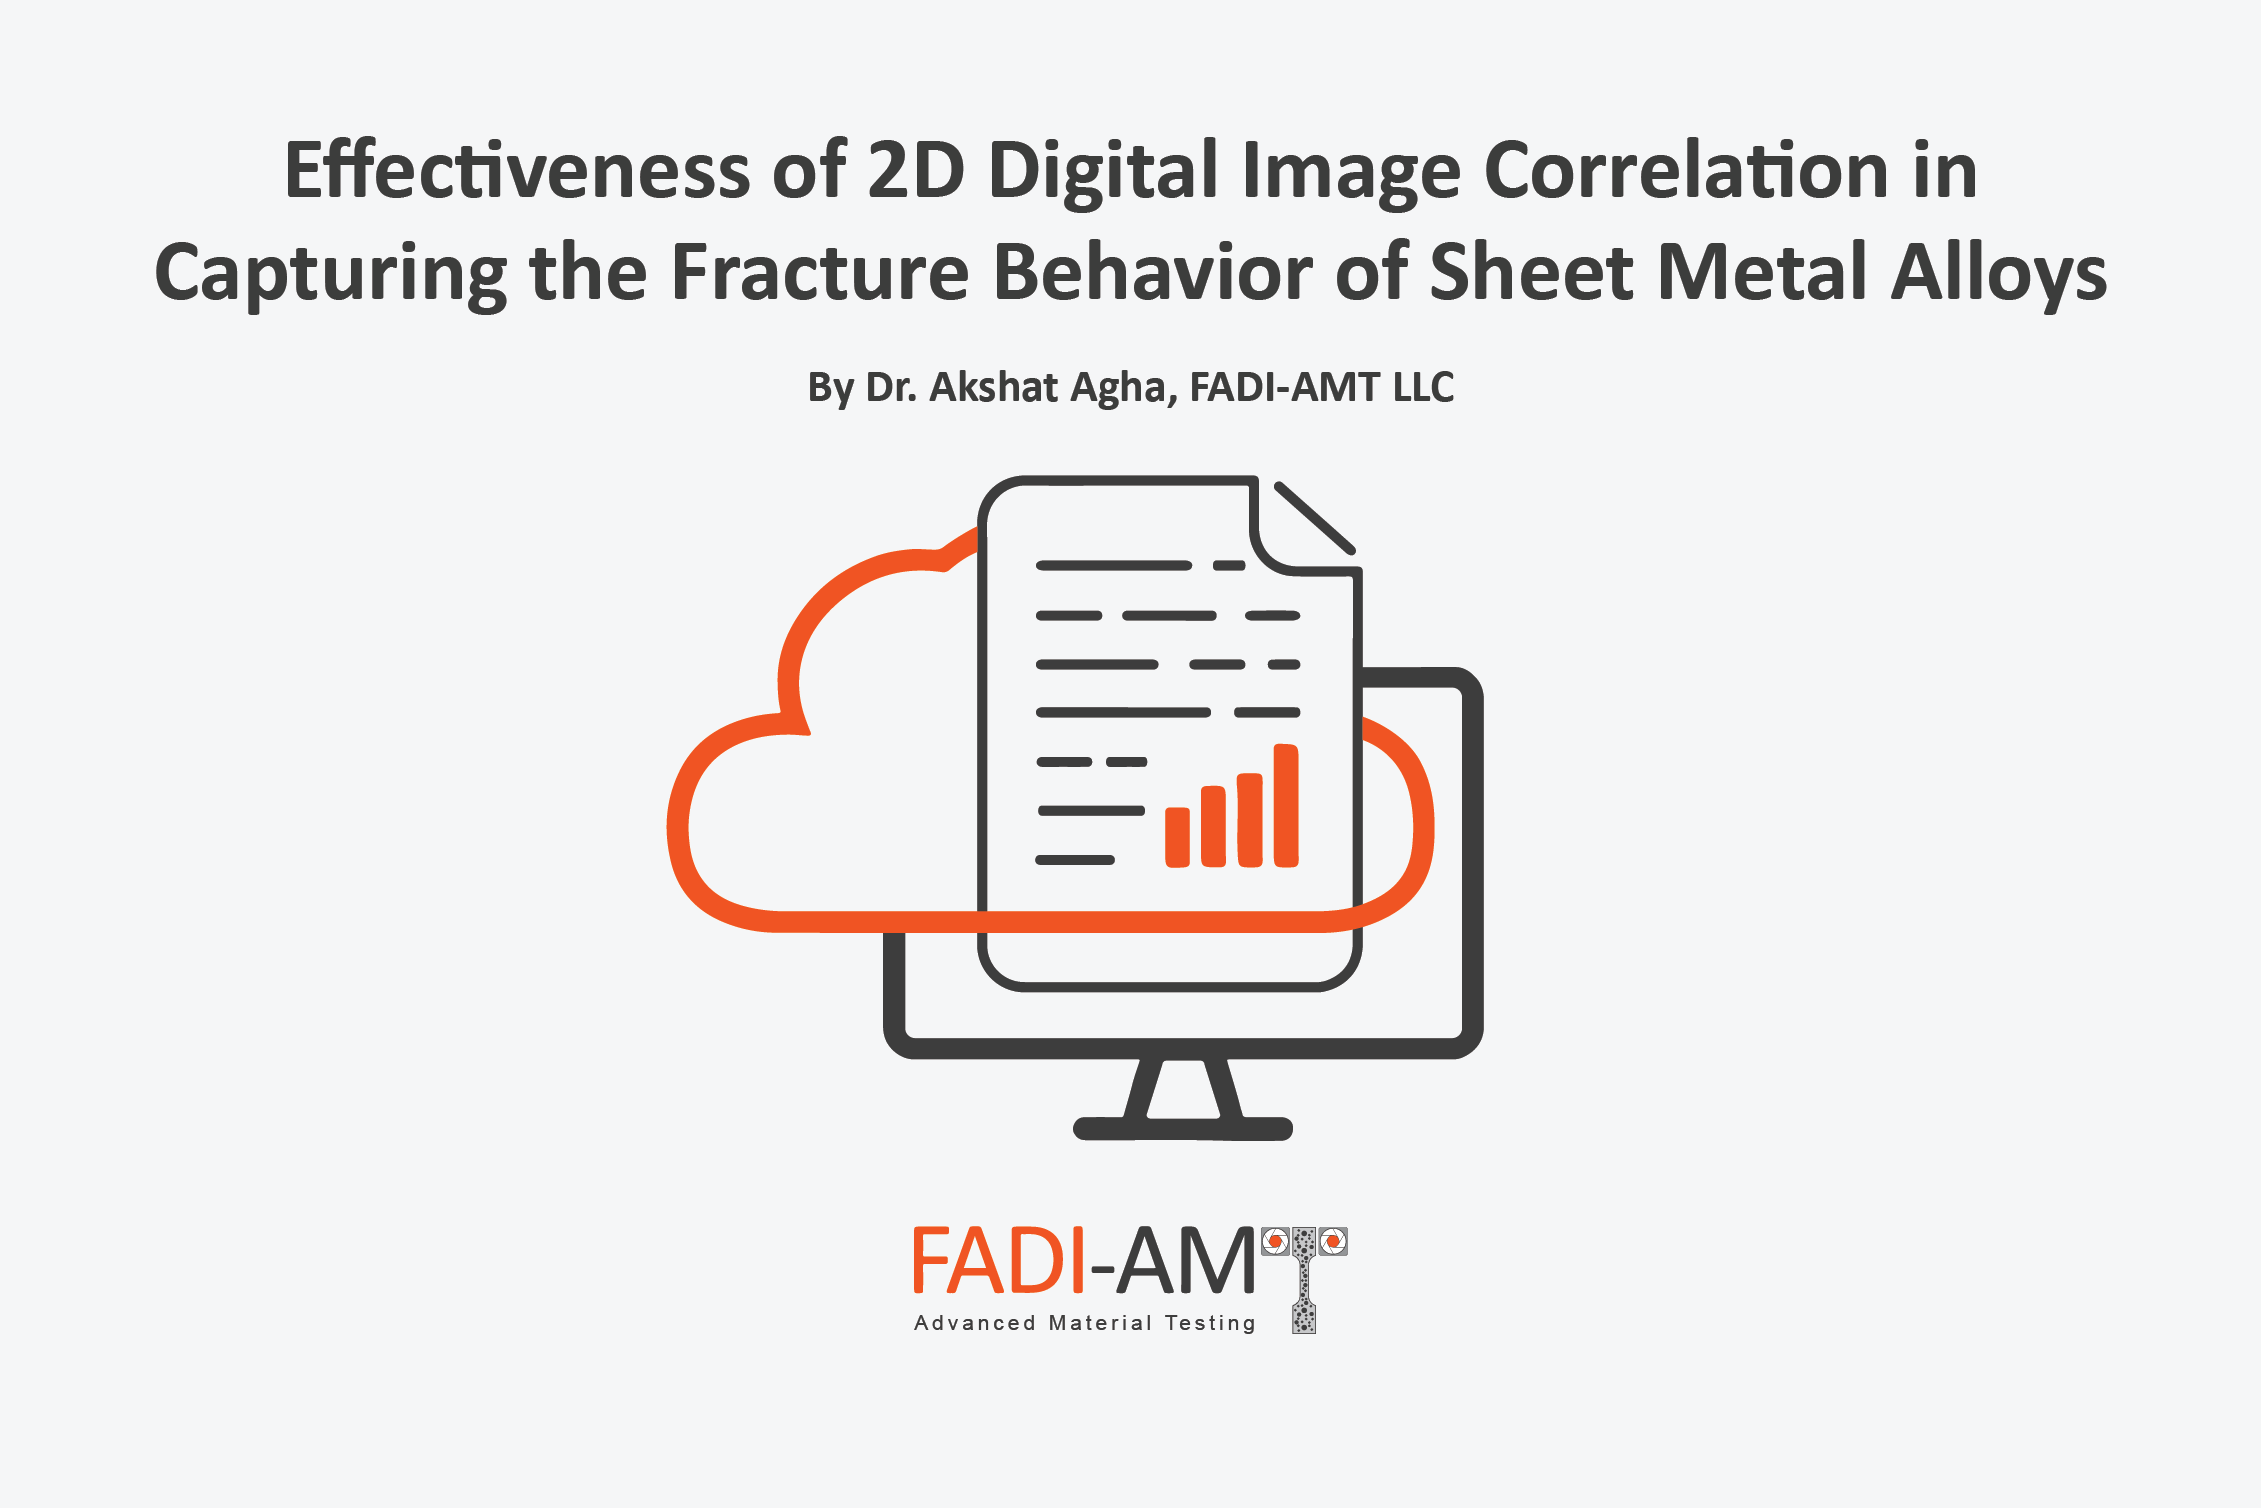 Effectiveness of 2D Digital Image Correlation in Capturing the Fracture Behavior of Sheet Metal Alloys_FADI-AMT-Publications